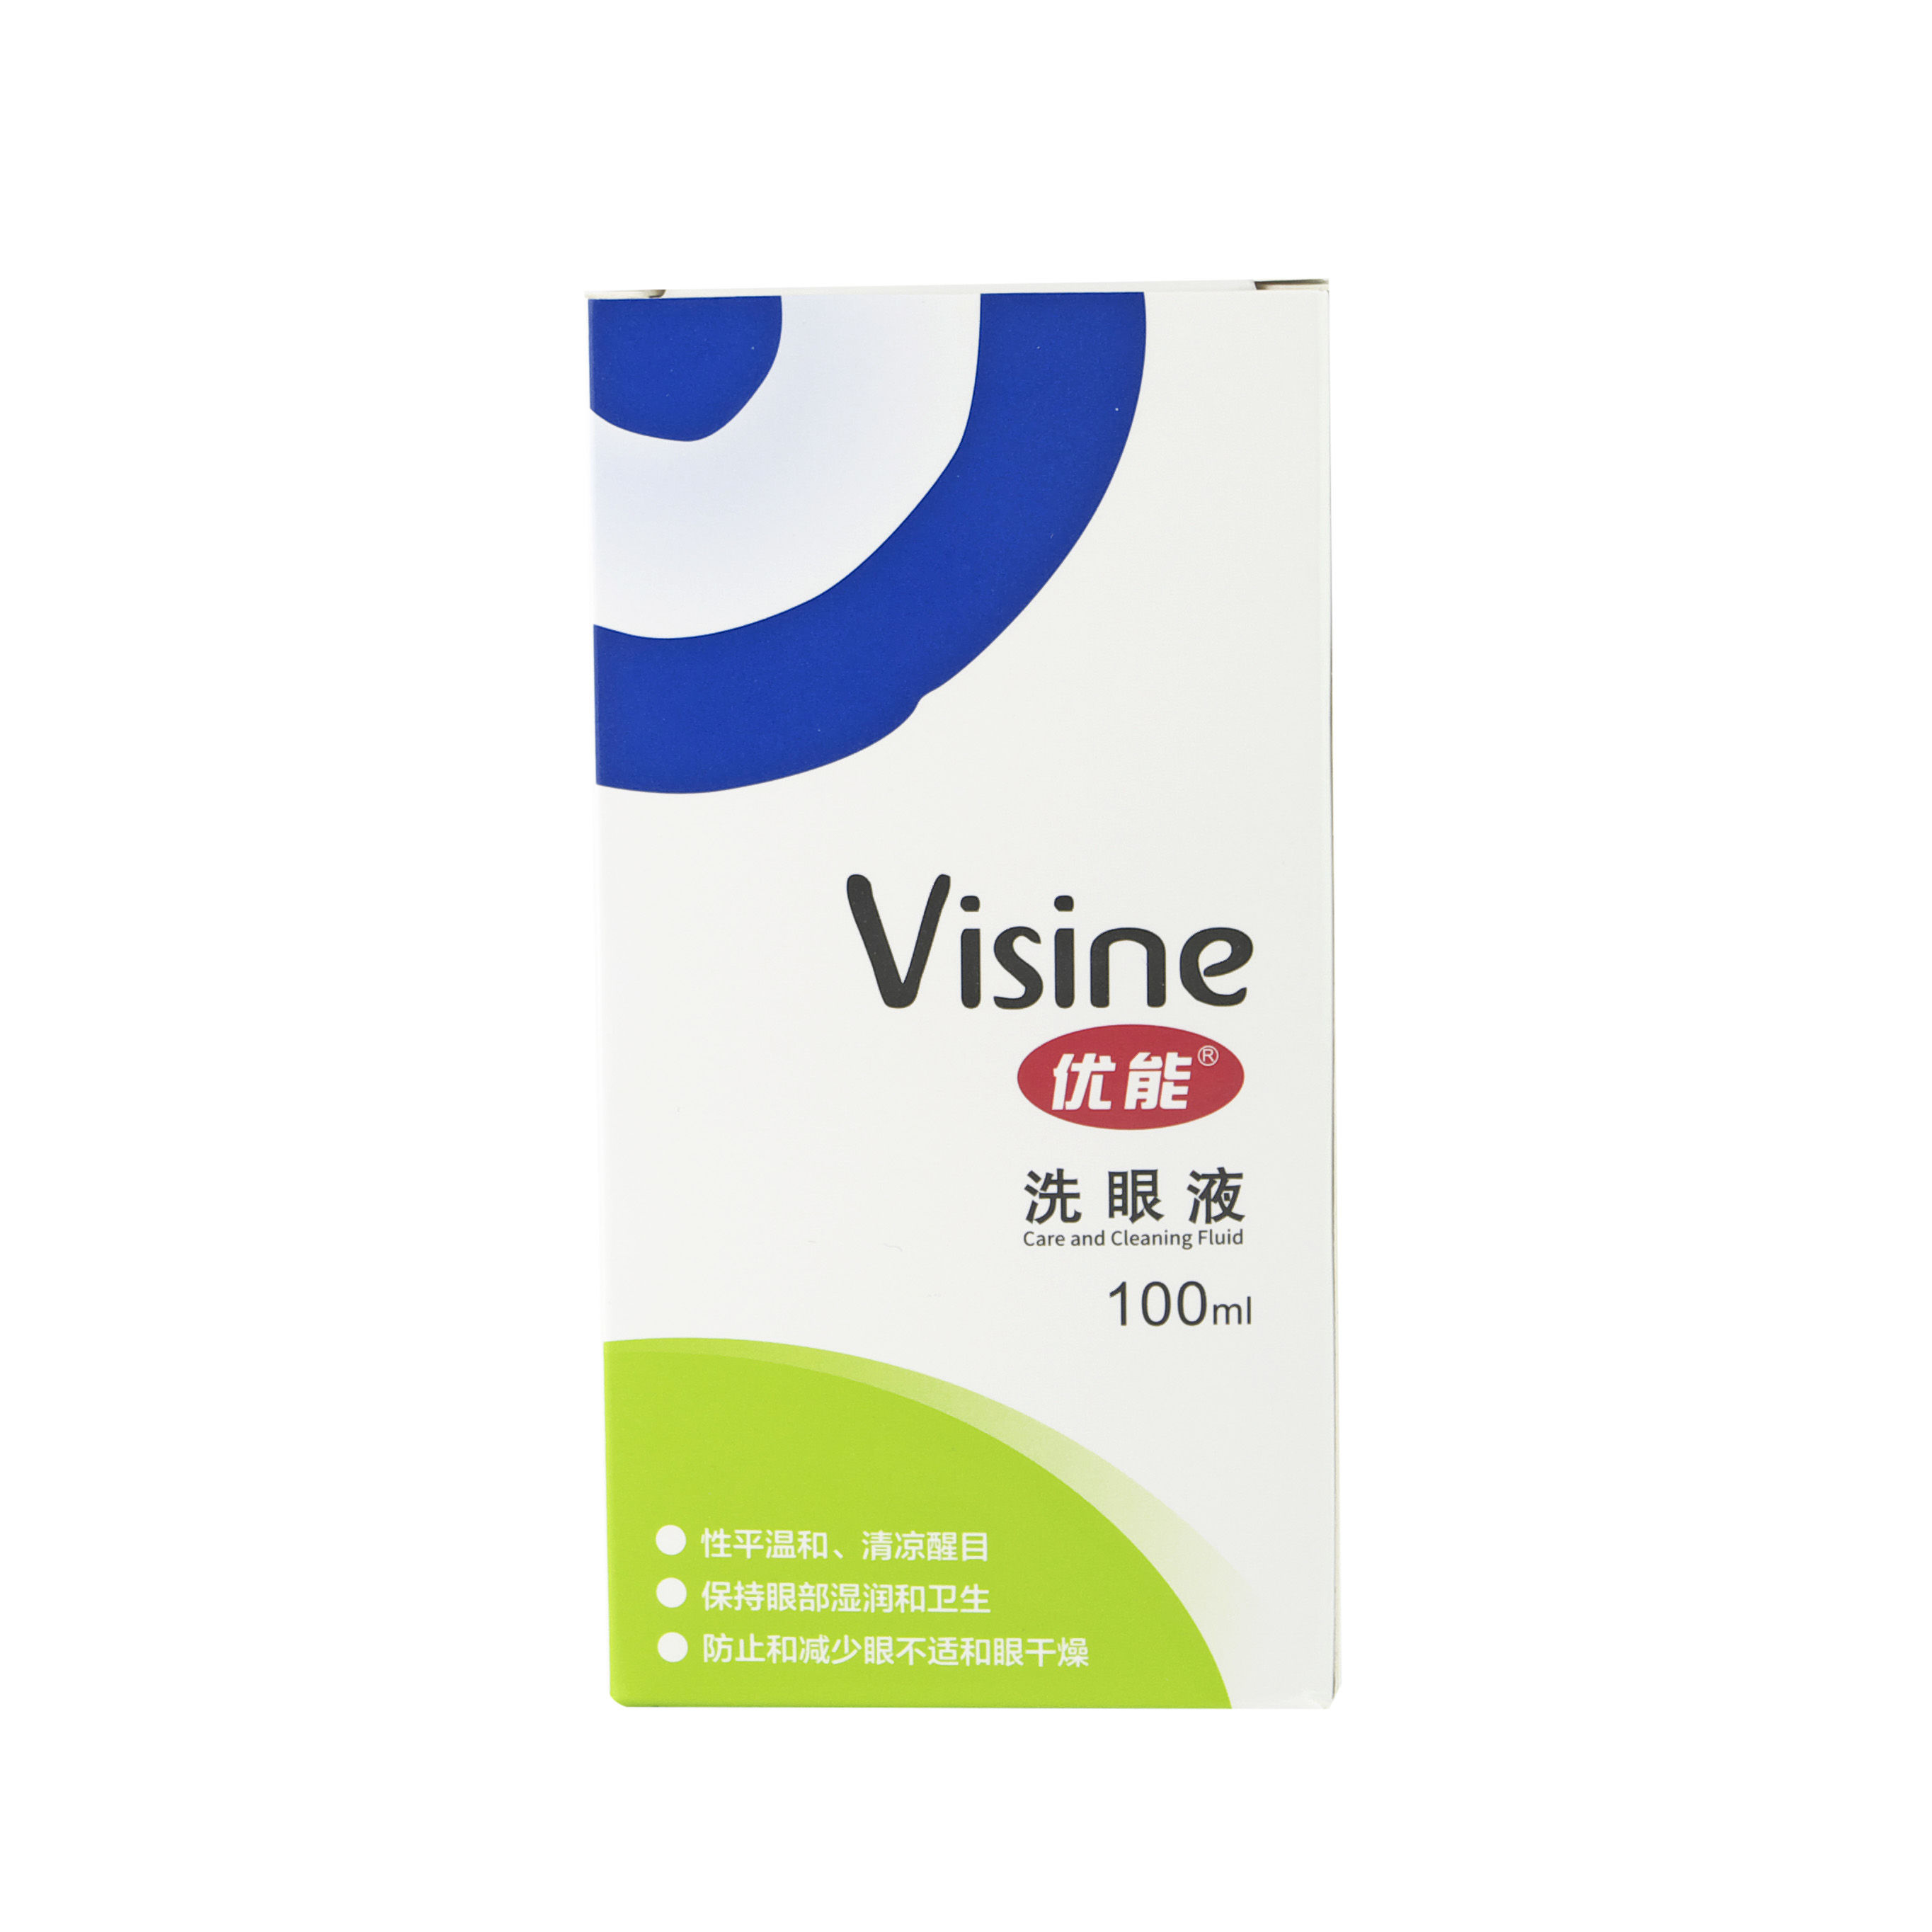 You Neng Eye Wash 100ml eye care solution eye wash water eye cleaner to relieve eye fatigue and dryness